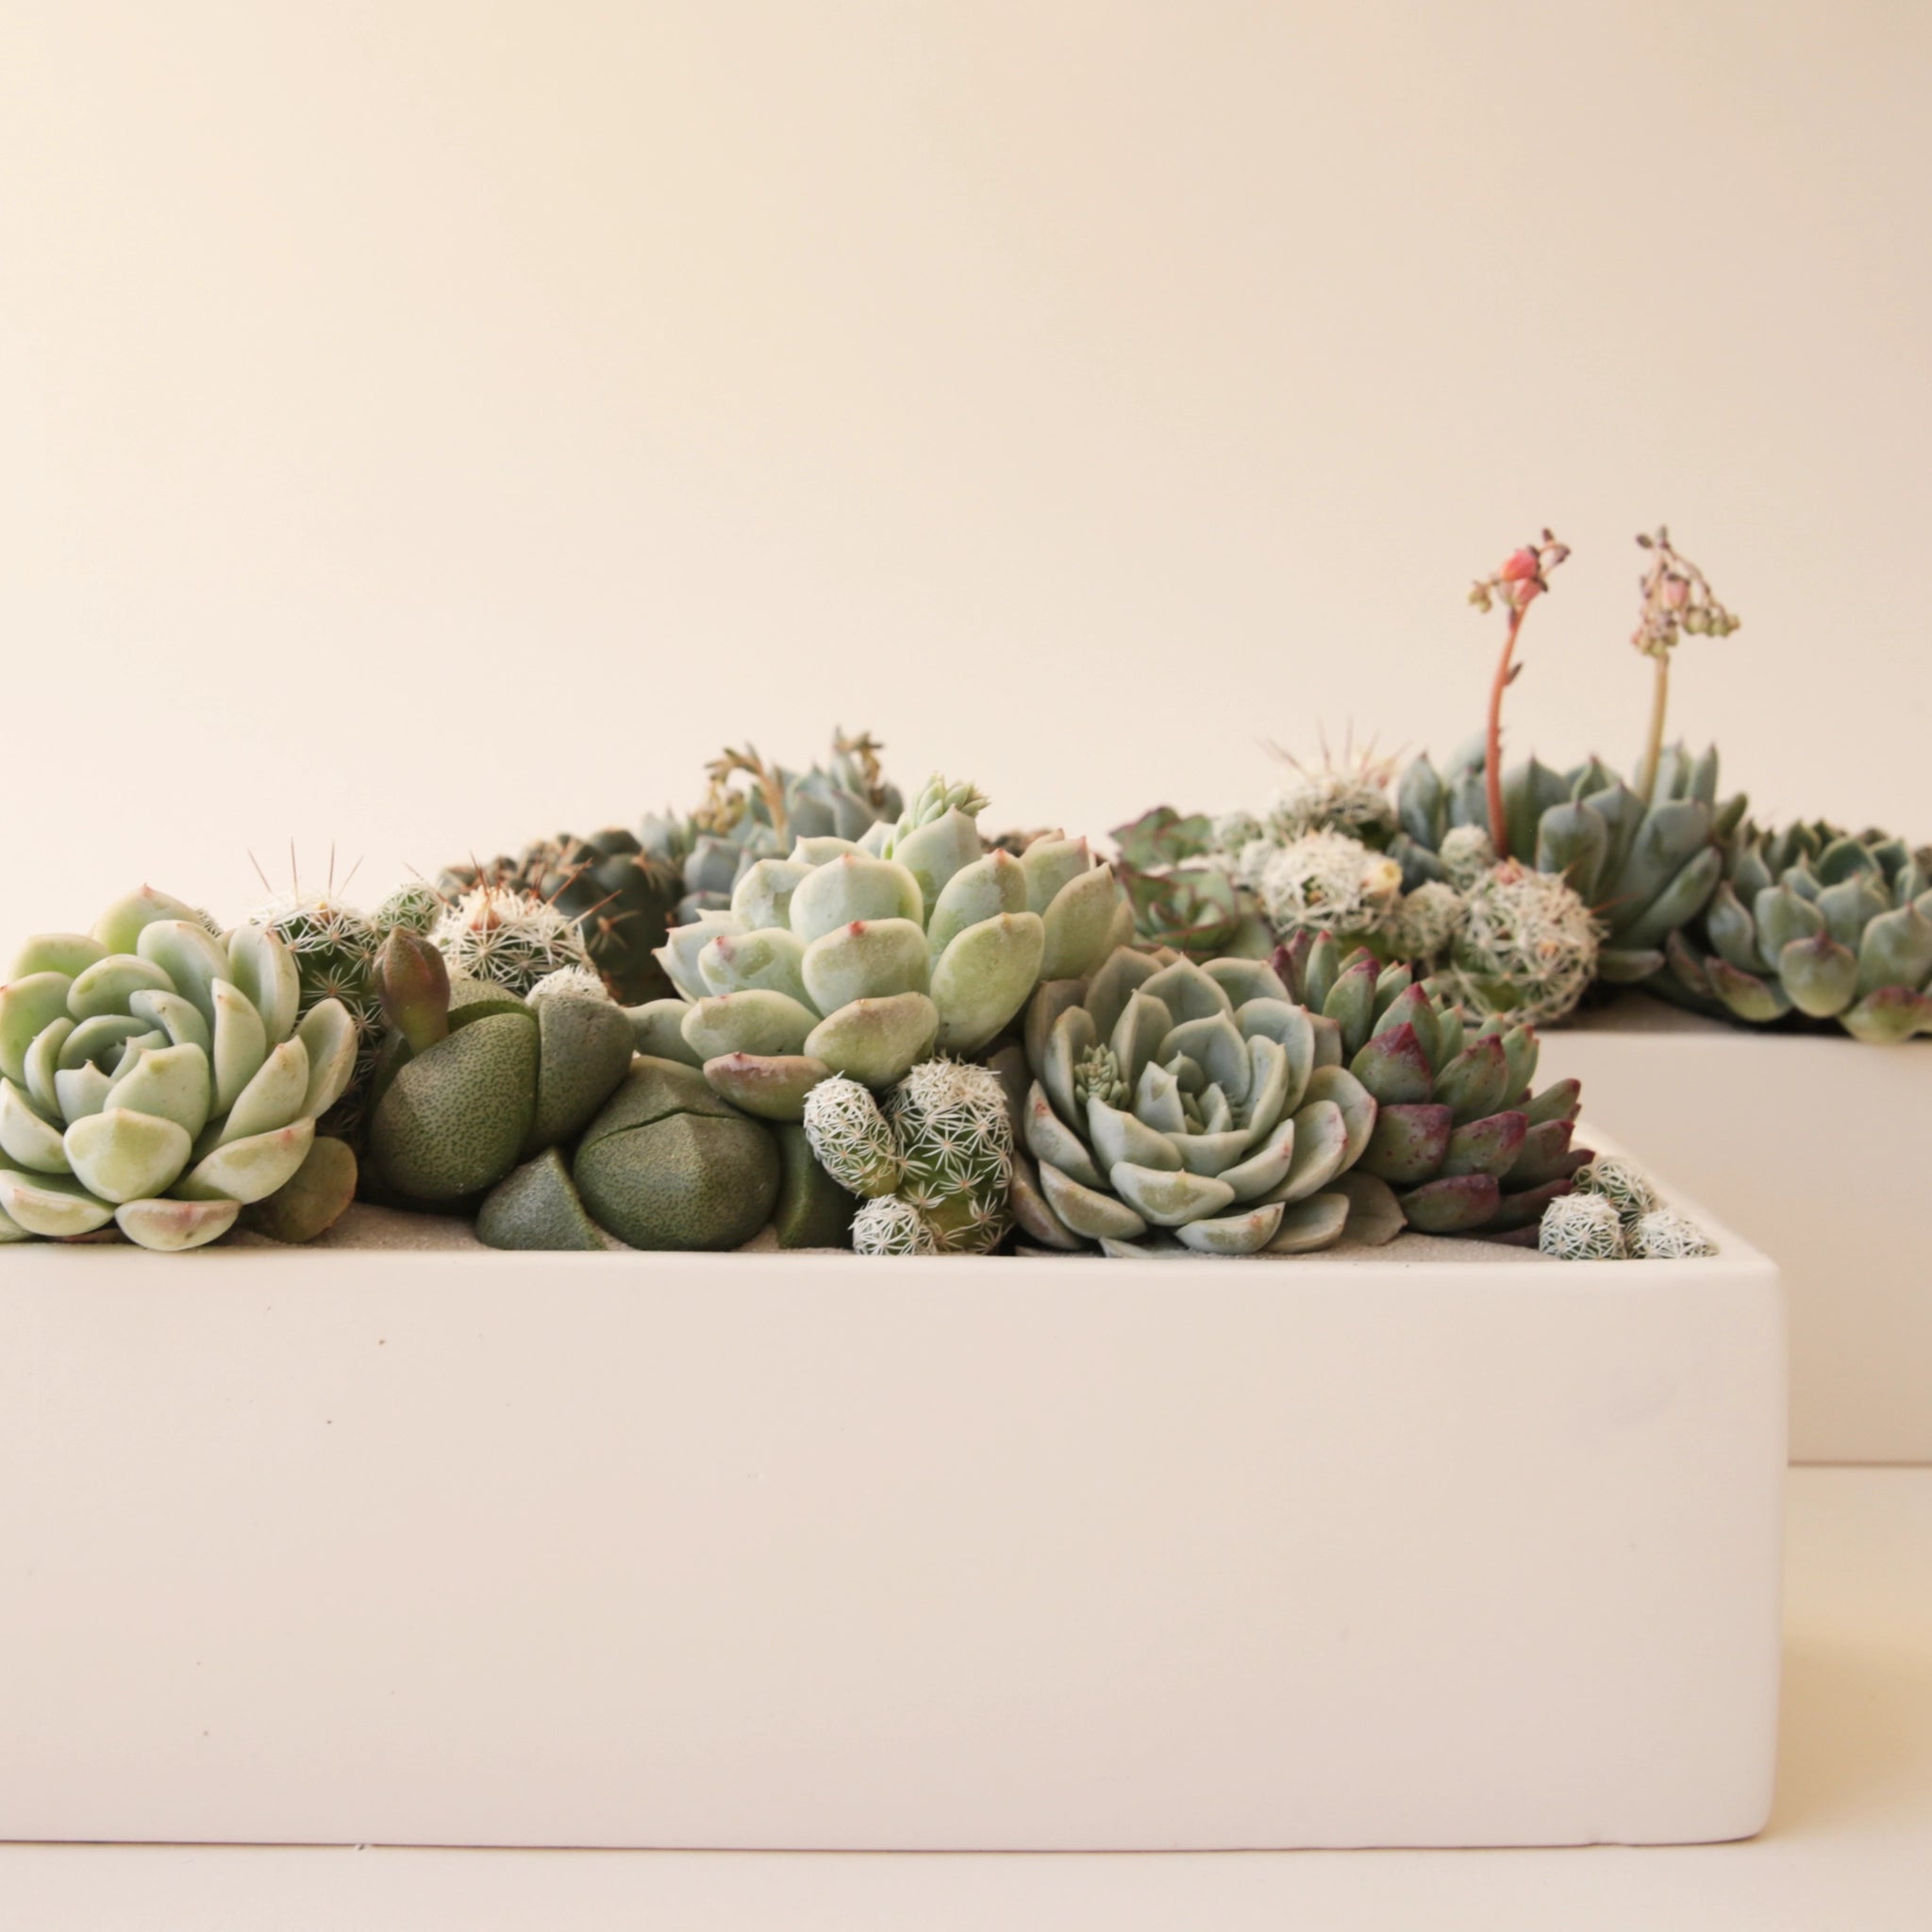 A long white rectangular ceramic planter filled with succulents (not included with purchase).